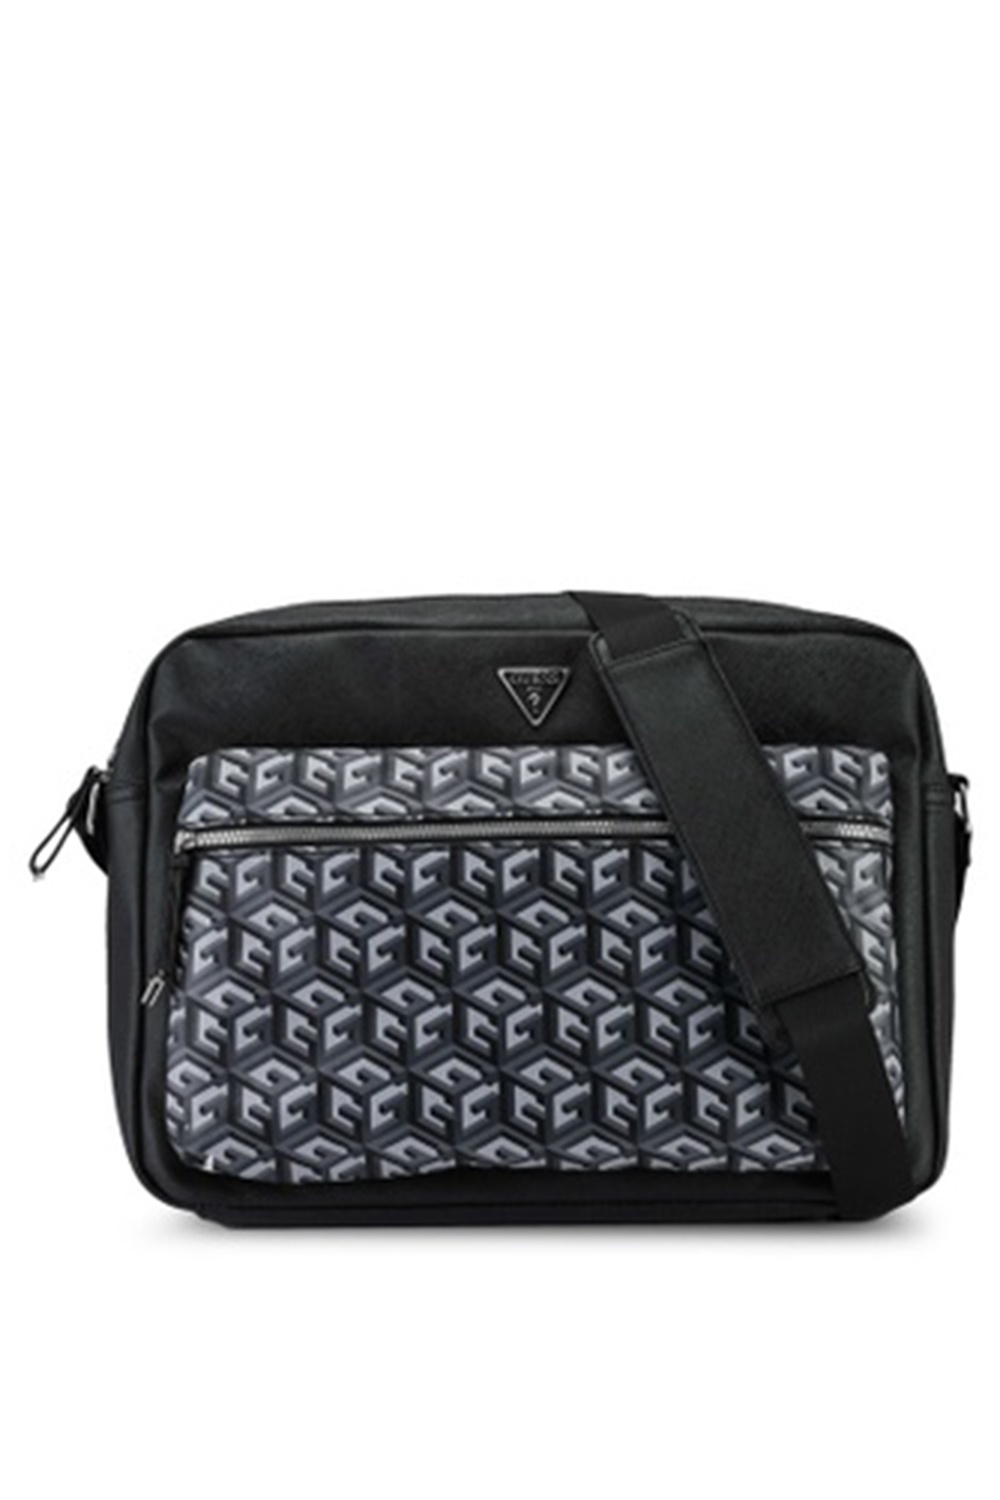 Top more than 59 guess messenger bag mens - in.cdgdbentre